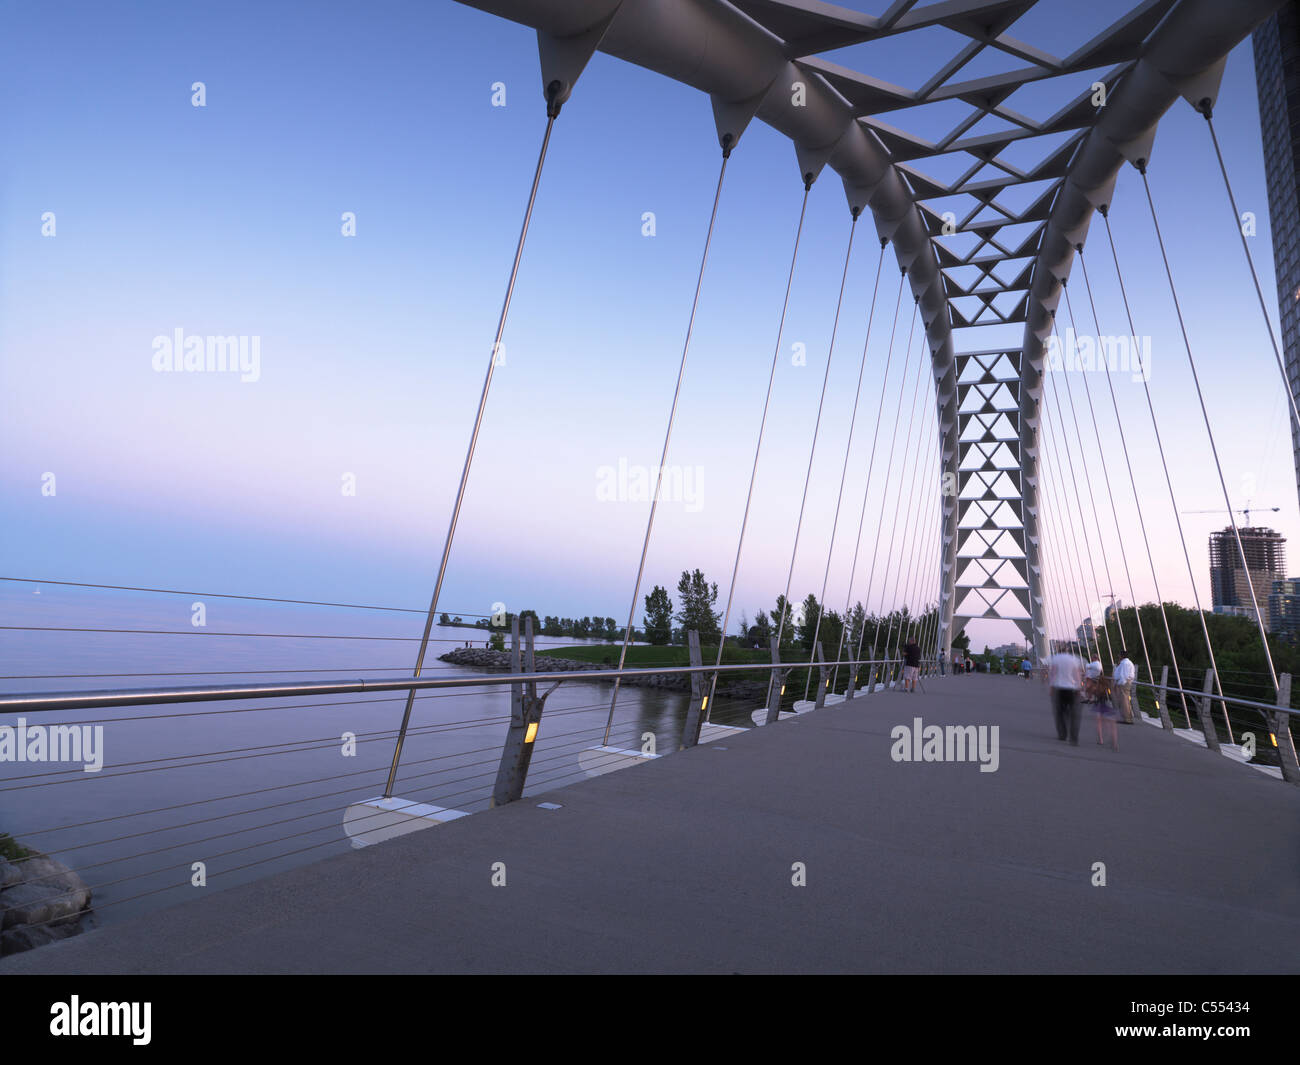 License available at MaximImages.com The Humber River Arch Bridge in Toronto during sunset also known as the Humber Bay Gateway Bridge. Canada Stock Photo